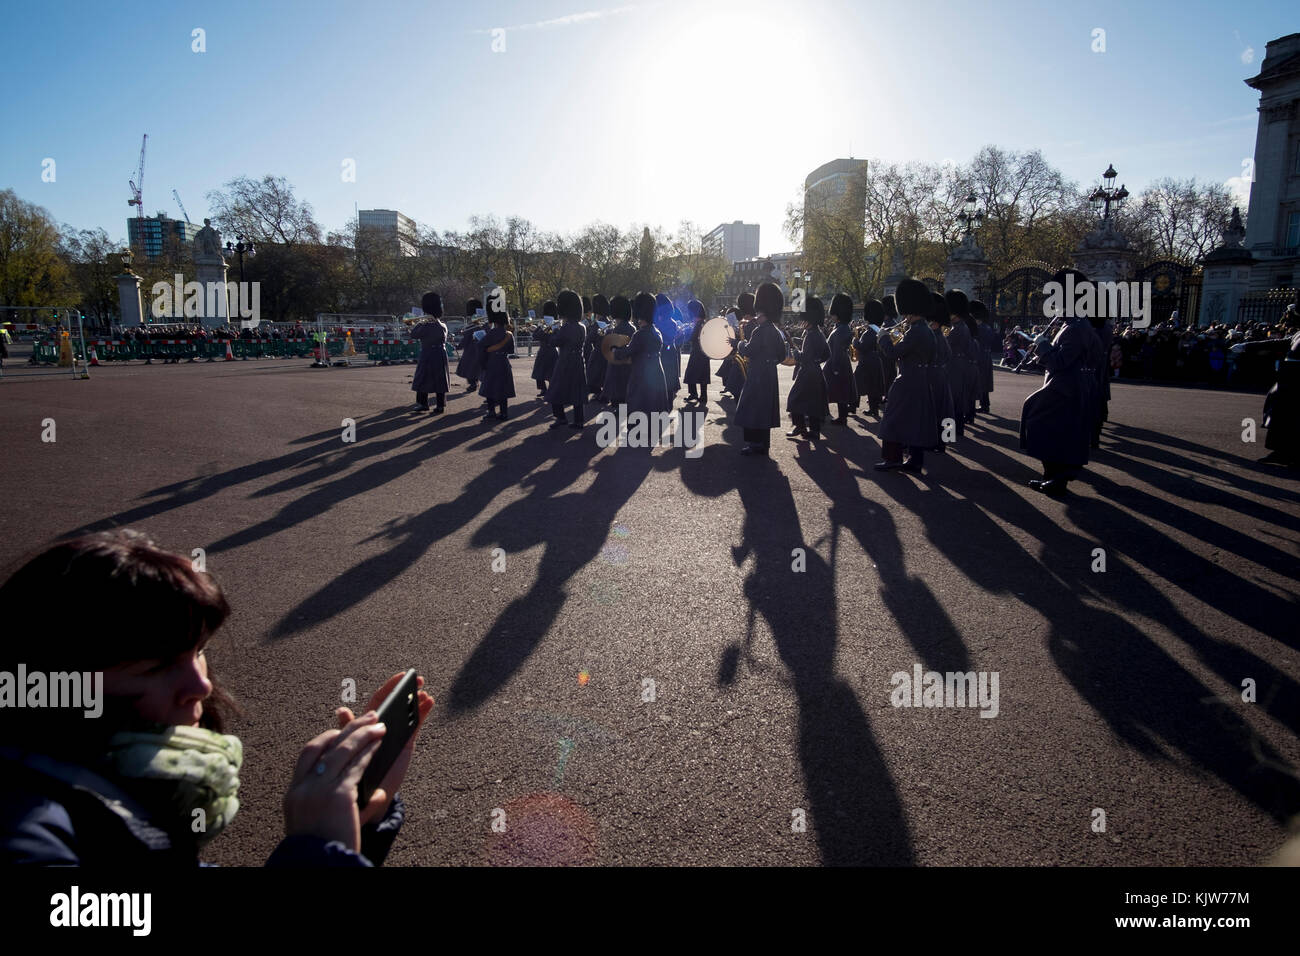 Buckingham Palace, London, UK. 26 November, 2017. In a historic first the Royal Navy form the Queen’s Guard at Buckingham Palace with musical support from Band of HM Royal Marines Scotland and Band of the Irish Guards, the first time in 357 years the ceremony has not been carried out by the Army‘s Household Division Foot Guards Regiments. Large crowds turn out on a cold and sunny winters day to watch the ceremony. Credit: Malcolm Park/Alamy Live News. Stock Photo